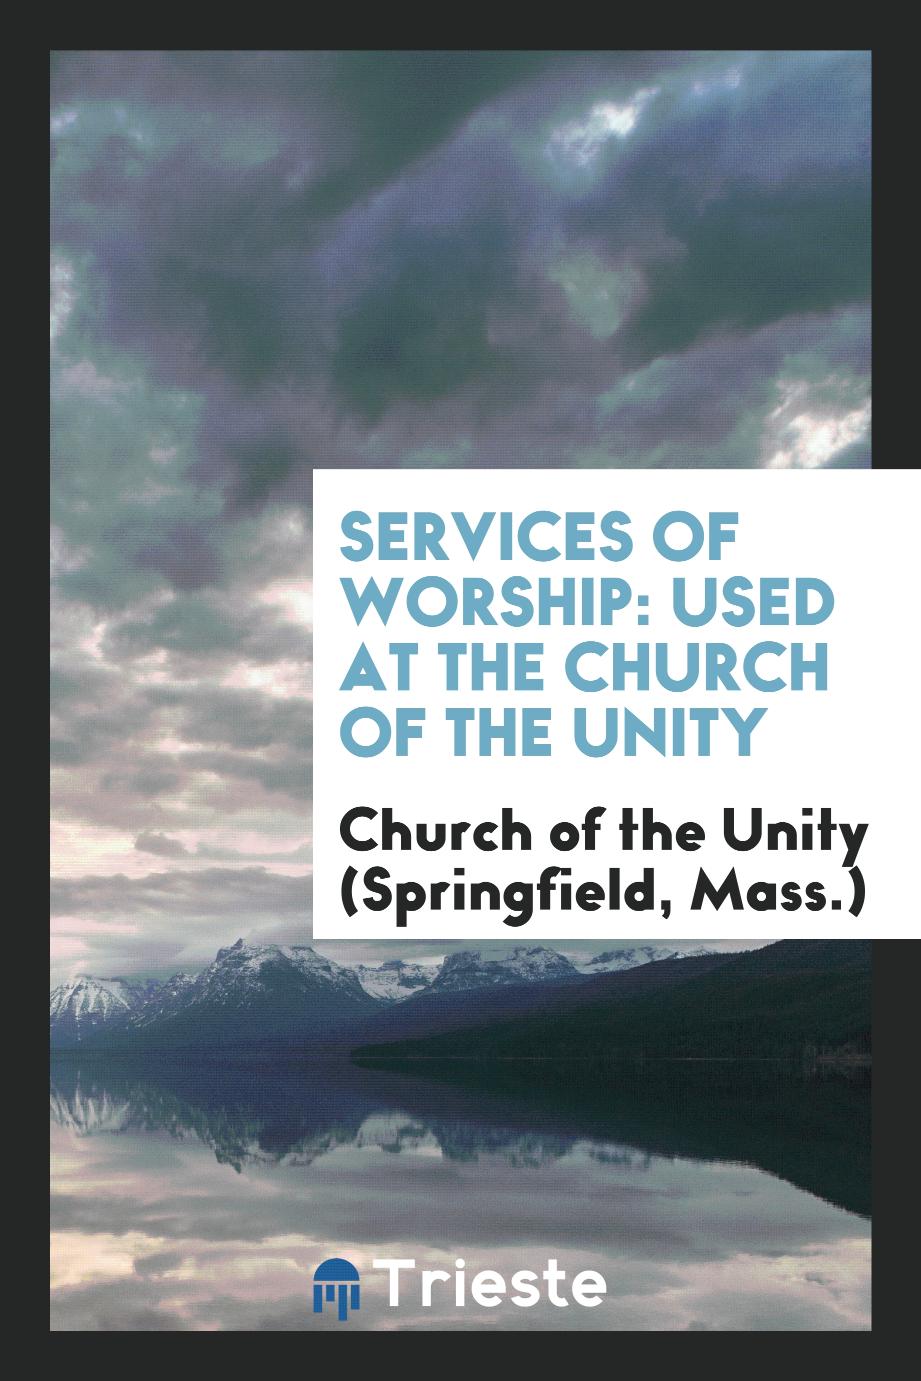 Services of Worship: Used at the Church of the Unity